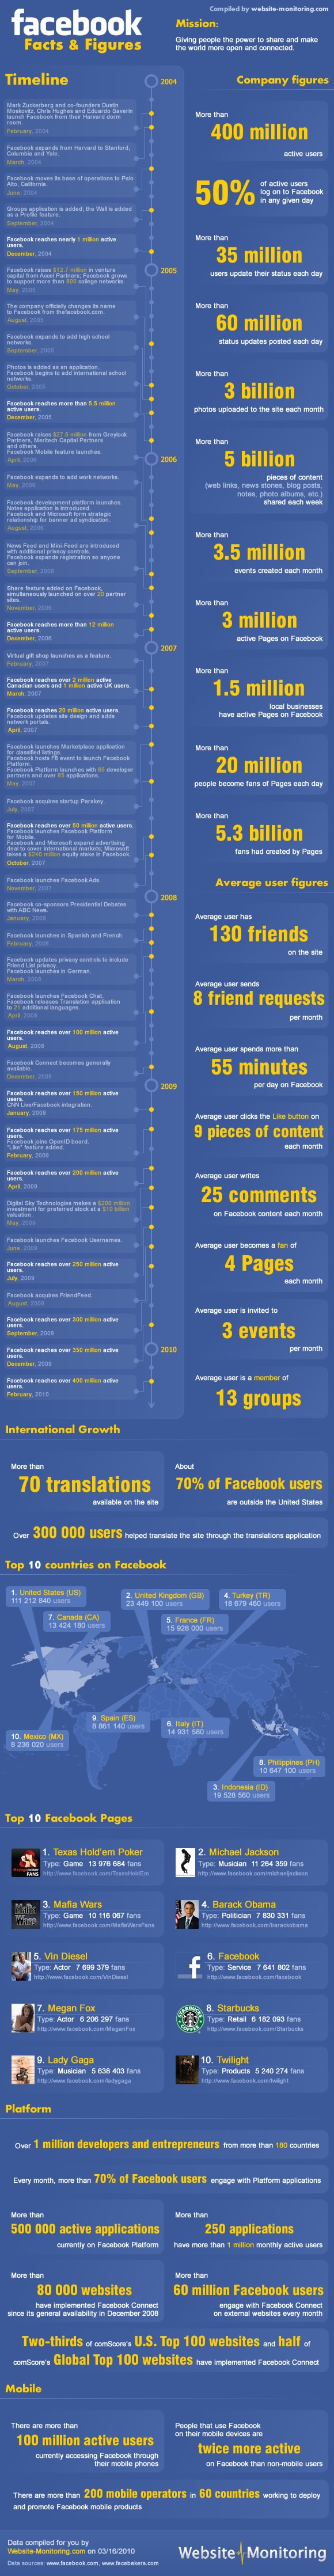 http://www.website-monitoring.com/blog/wp-content/uploads/2010/03/facebook-facts-and-figures.jpg